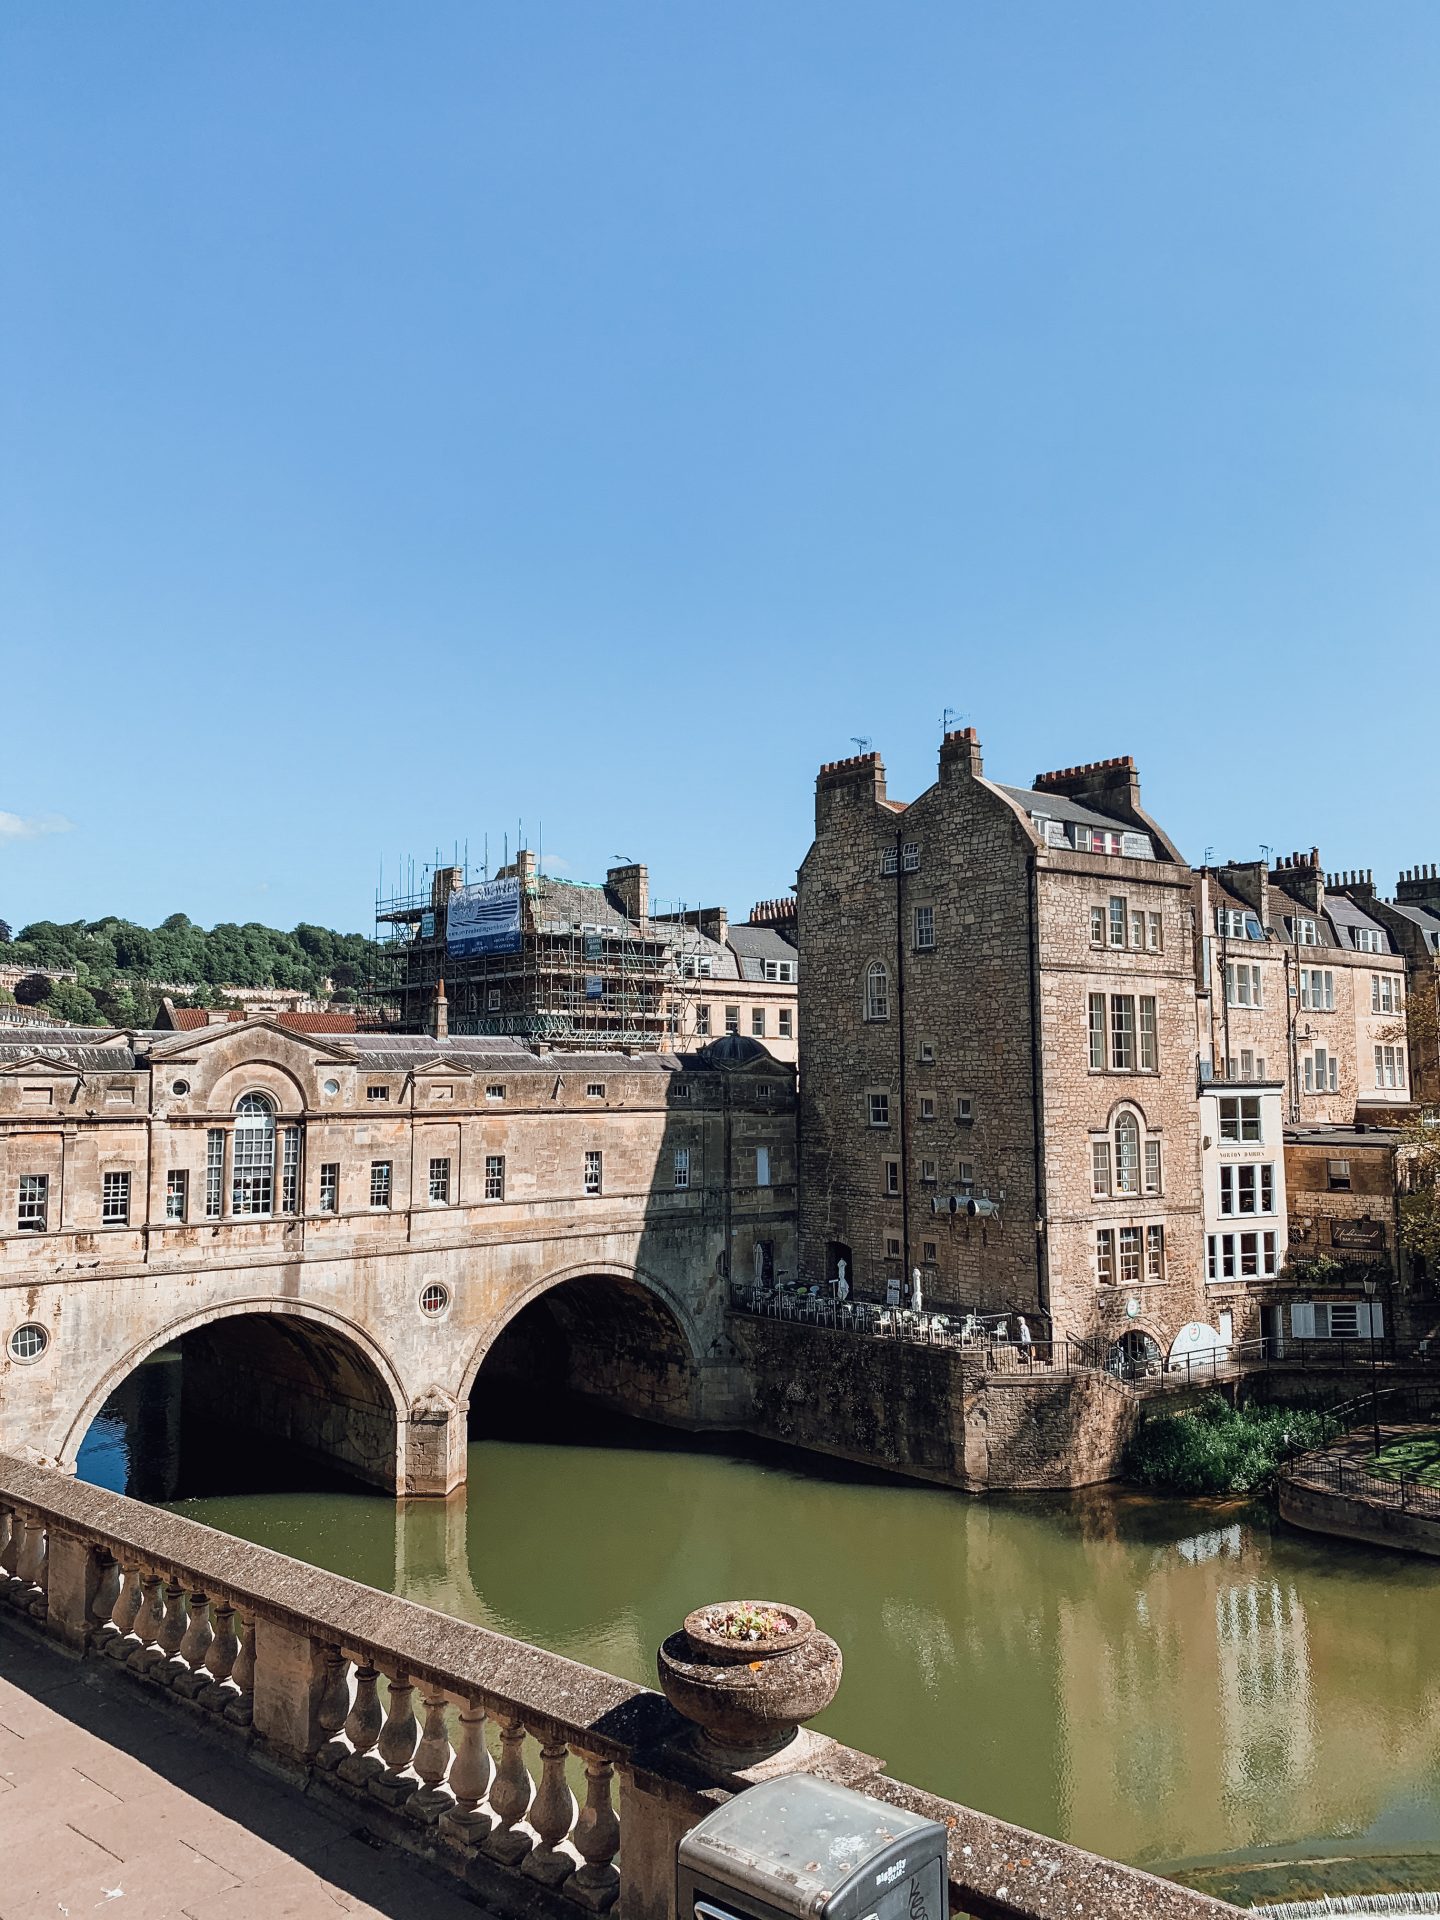 Pulteney Bridge, Bath Somerset, England. It’s one of only four bridges in the world to have shops across its full span on both sides.